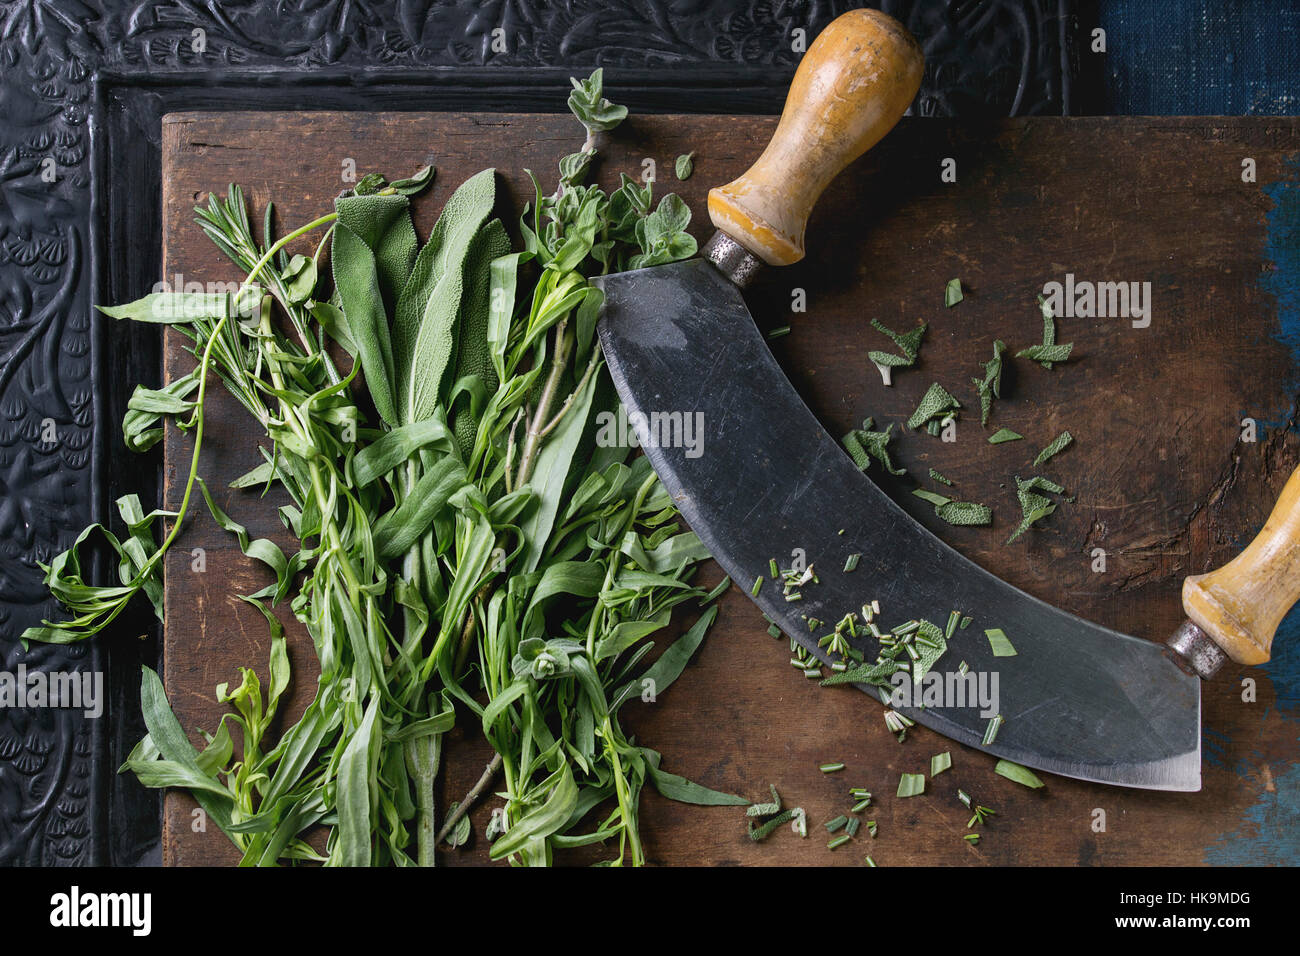 Bundle of fresh Italian herbs rosemary, oregano and sage with vintage herb cutter over old dark wooden and black ornate background. Top view Stock Photo